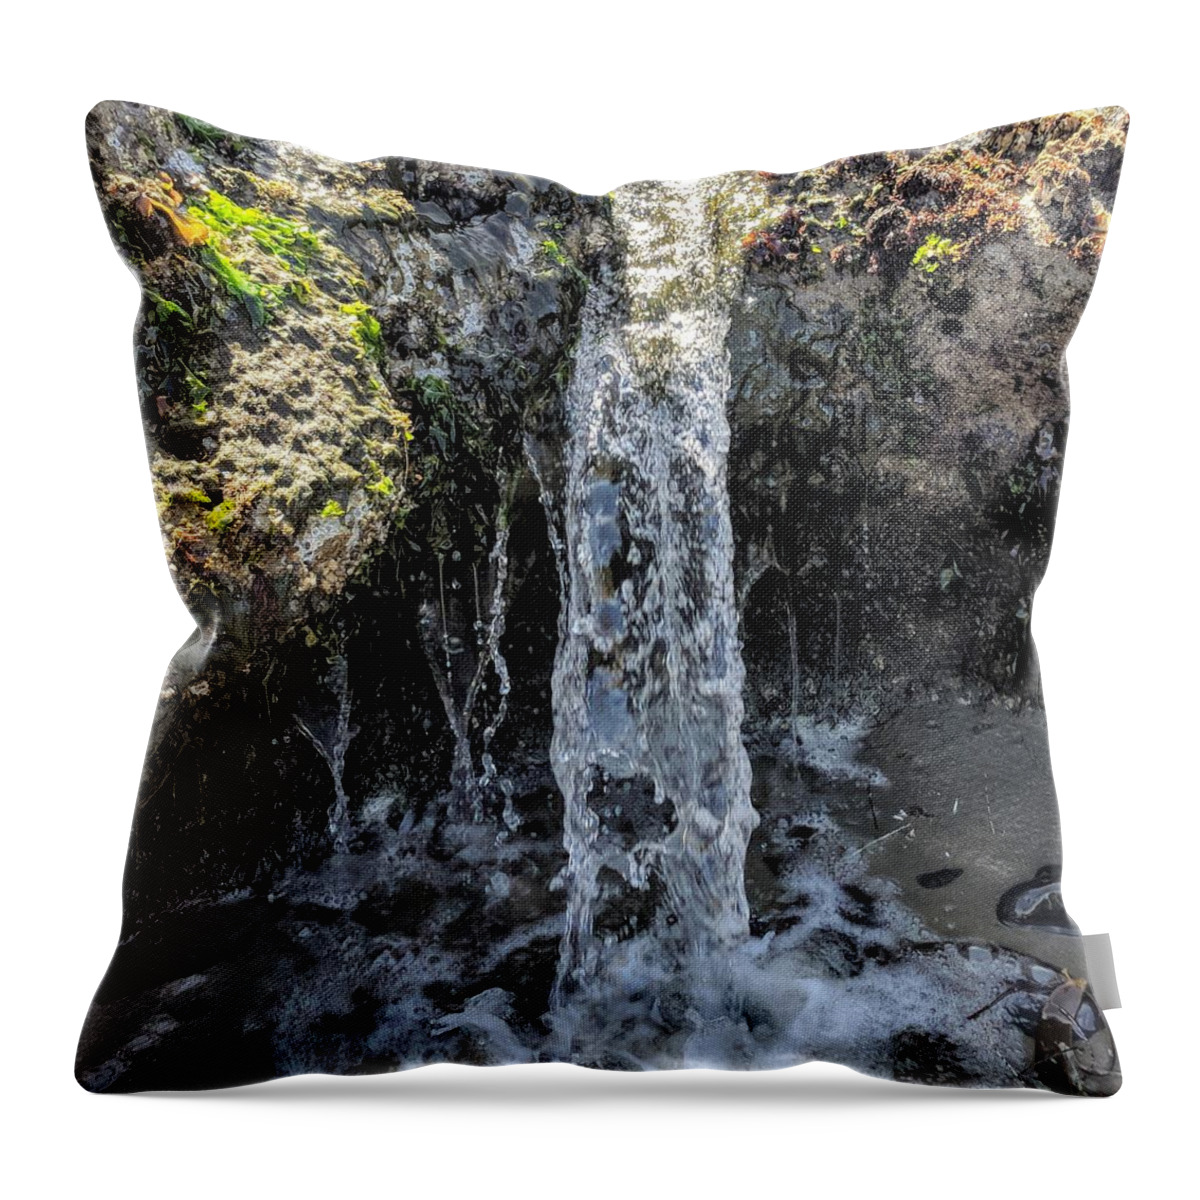 Water Throw Pillow featuring the photograph Tidal Falls by Misty Morehead